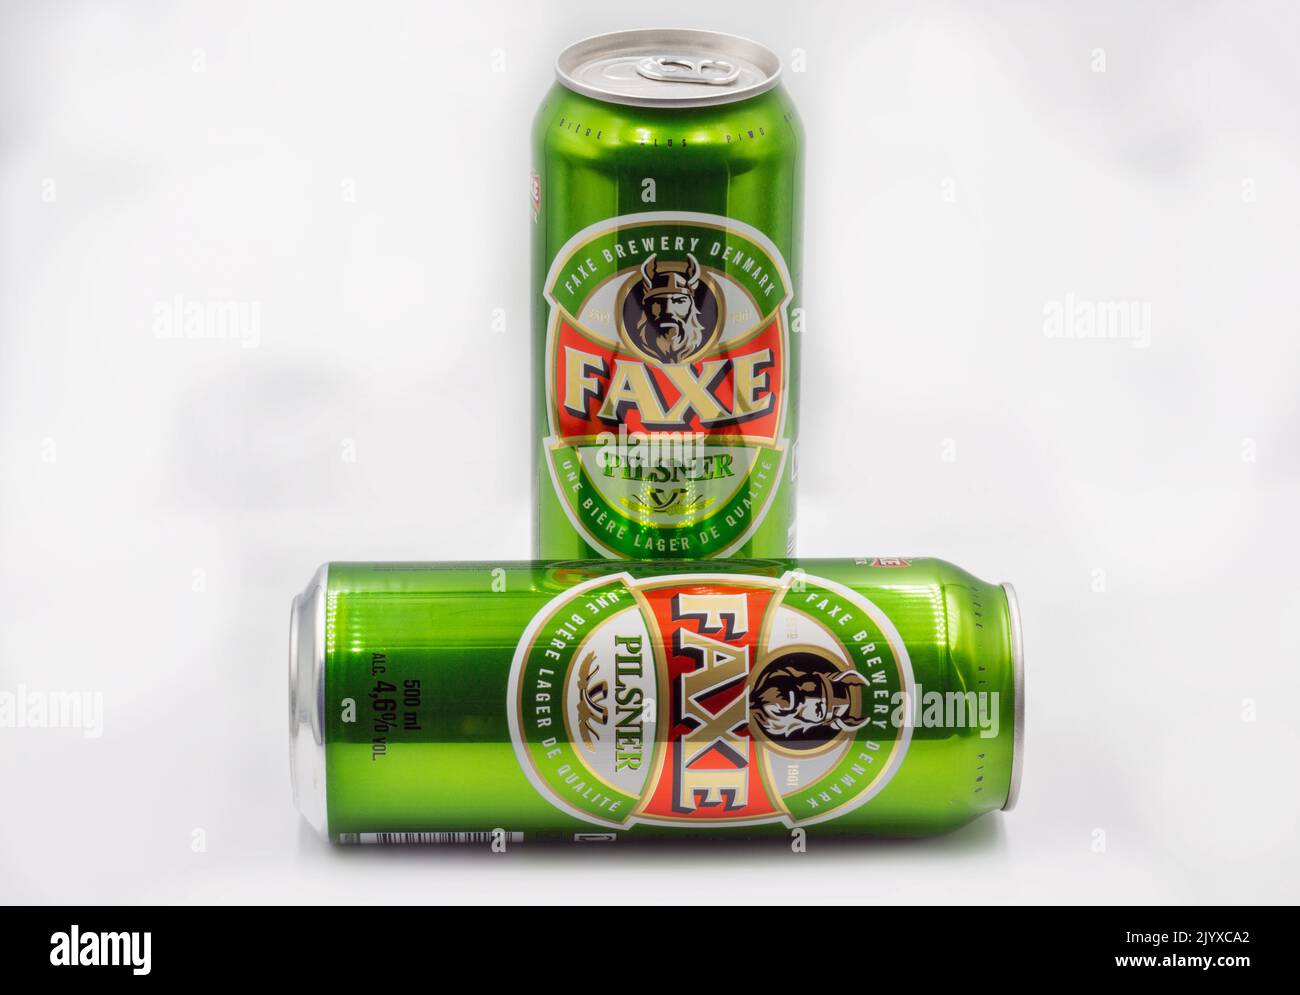 Kyiv, Ukraine - October 02, 2021: Faxe Danish pilsner beer cans closeup against white bacground. Faxe or Fakse is a town on the island of Zealand in e Stock Photo